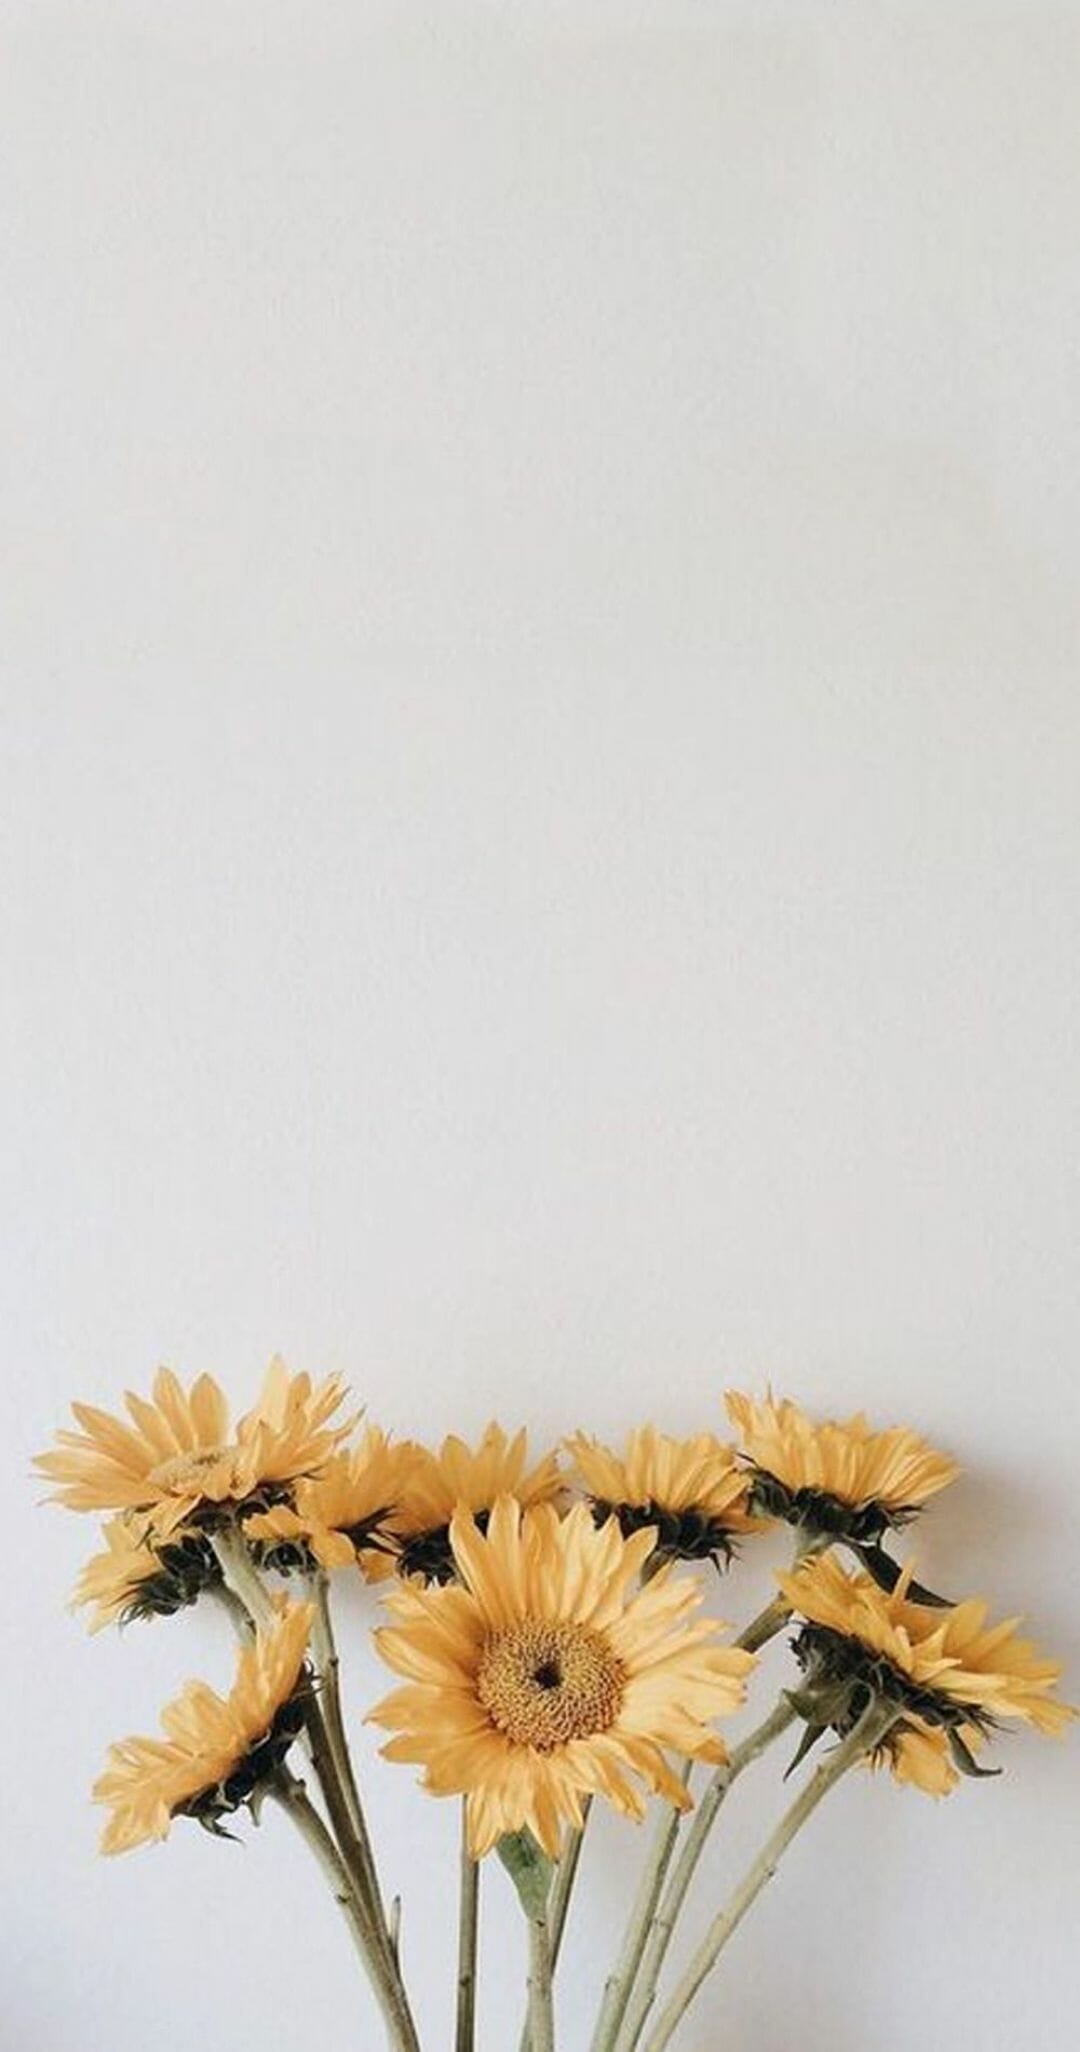 A vase of sunflowers on a white background - Pastel yellow, vintage